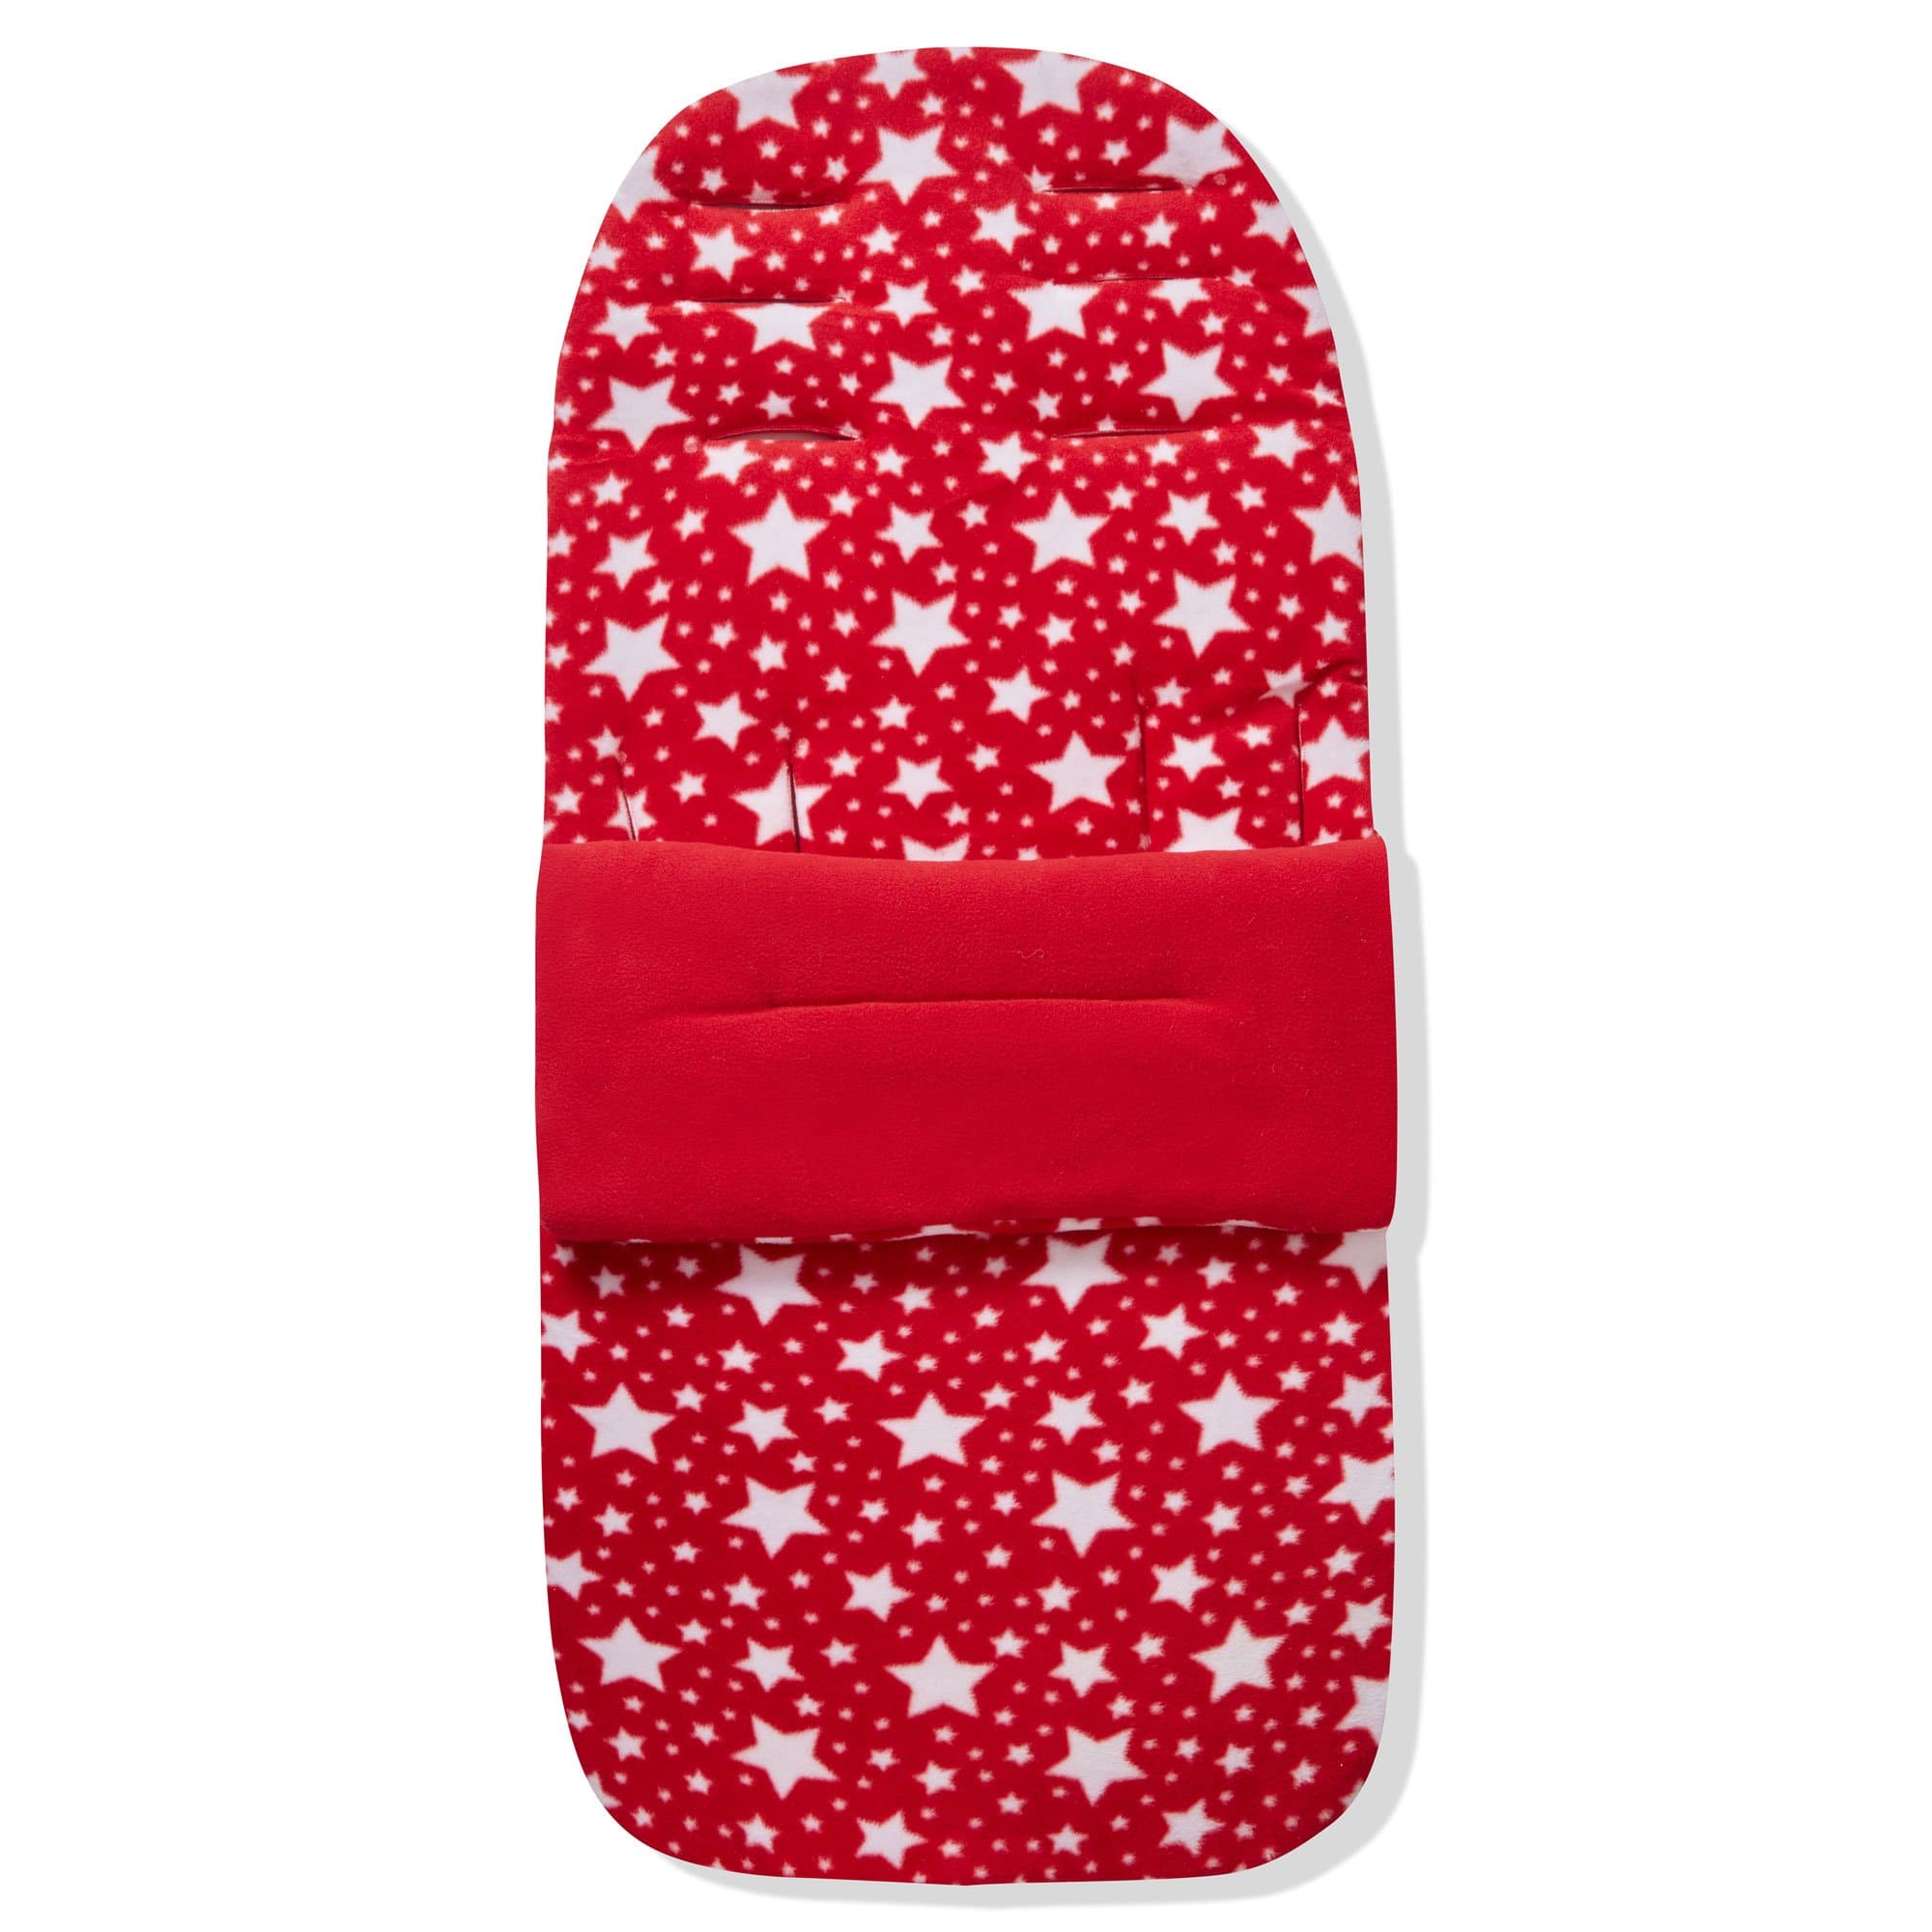 Fleece Footmuff / Cosy Toes Compatible With Bebe Confort - Red Star / Fits All Models | For Your Little One